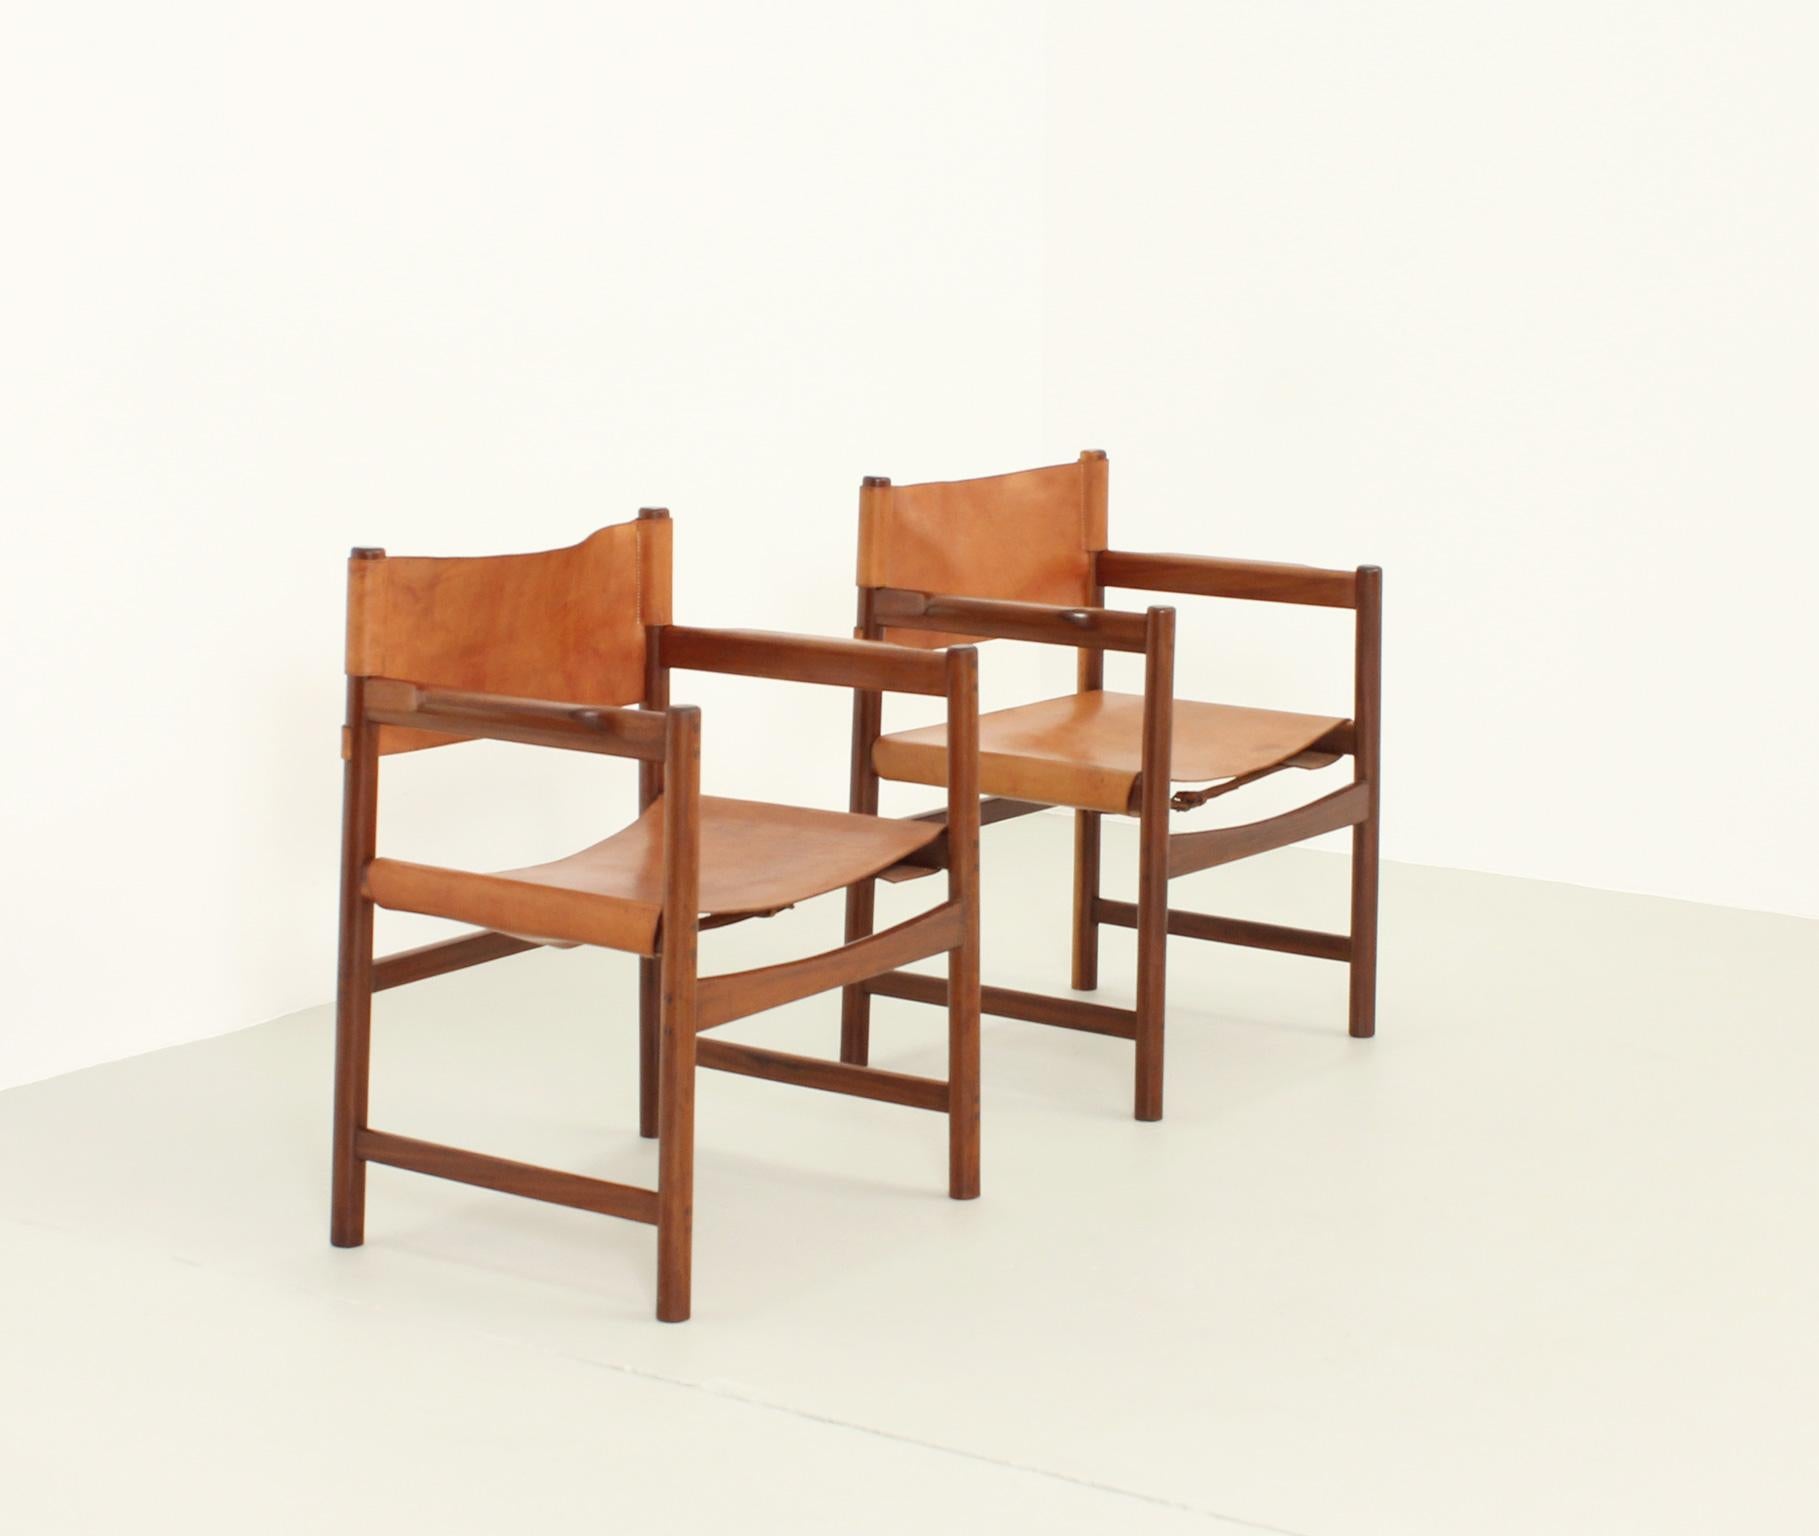 Mid-20th Century Pair of Spanish Chairs in Cognac Leather, Spain, 1960's